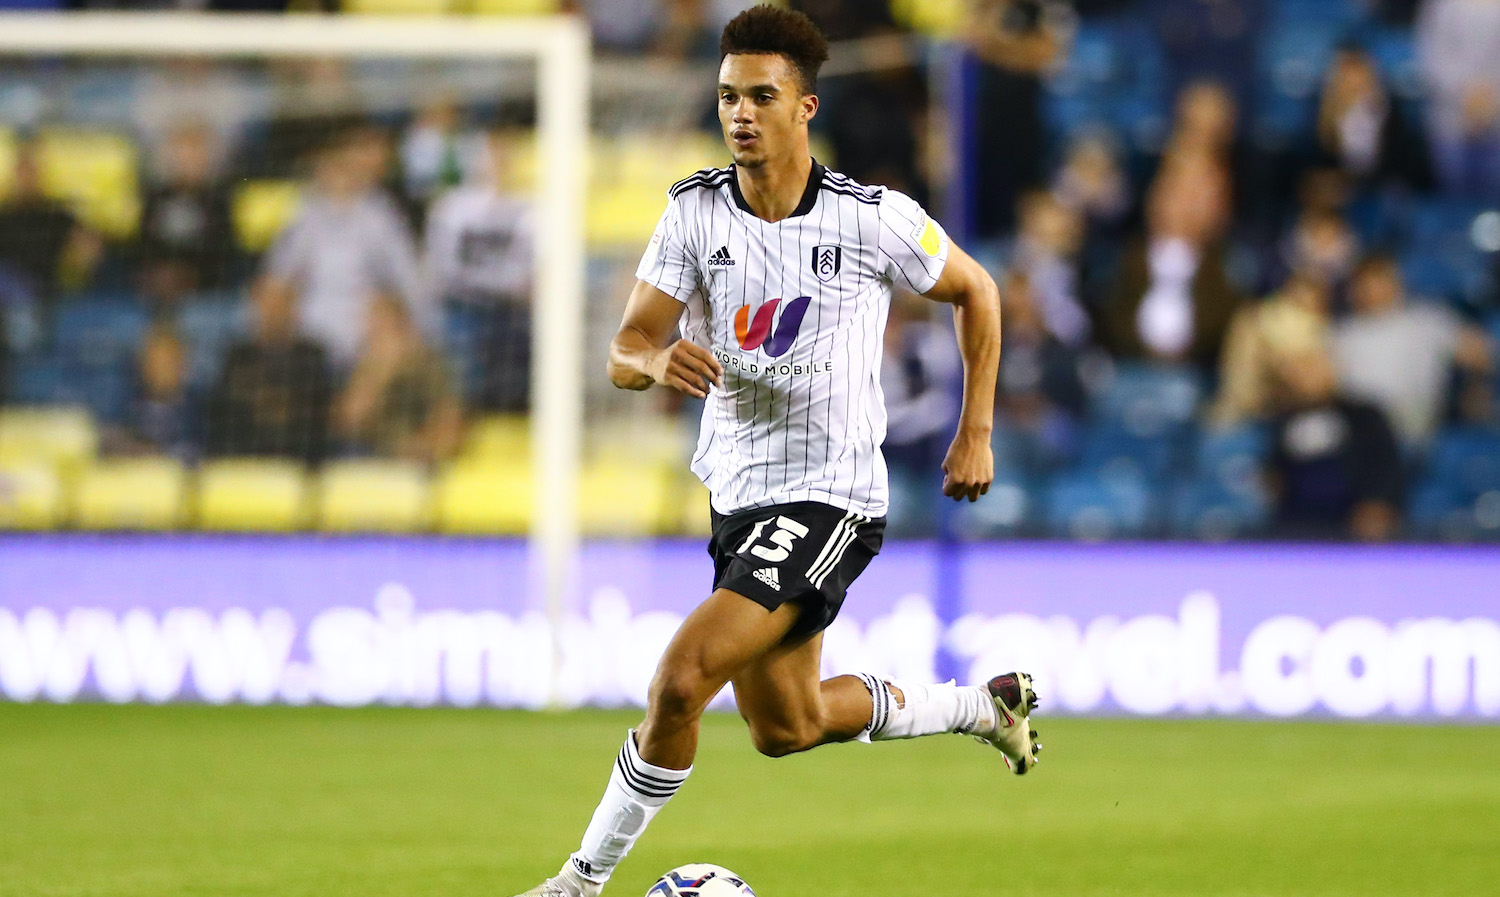 LONDON, ENGLAND - AUGUST 17: Antonee Robinson of Fulham runs with the ball during the Sky Bet Championship match between Millwall and Fulham at The Den on August 17, 2021 in London, England. (Photo by Jacques Feeney/Getty Images)